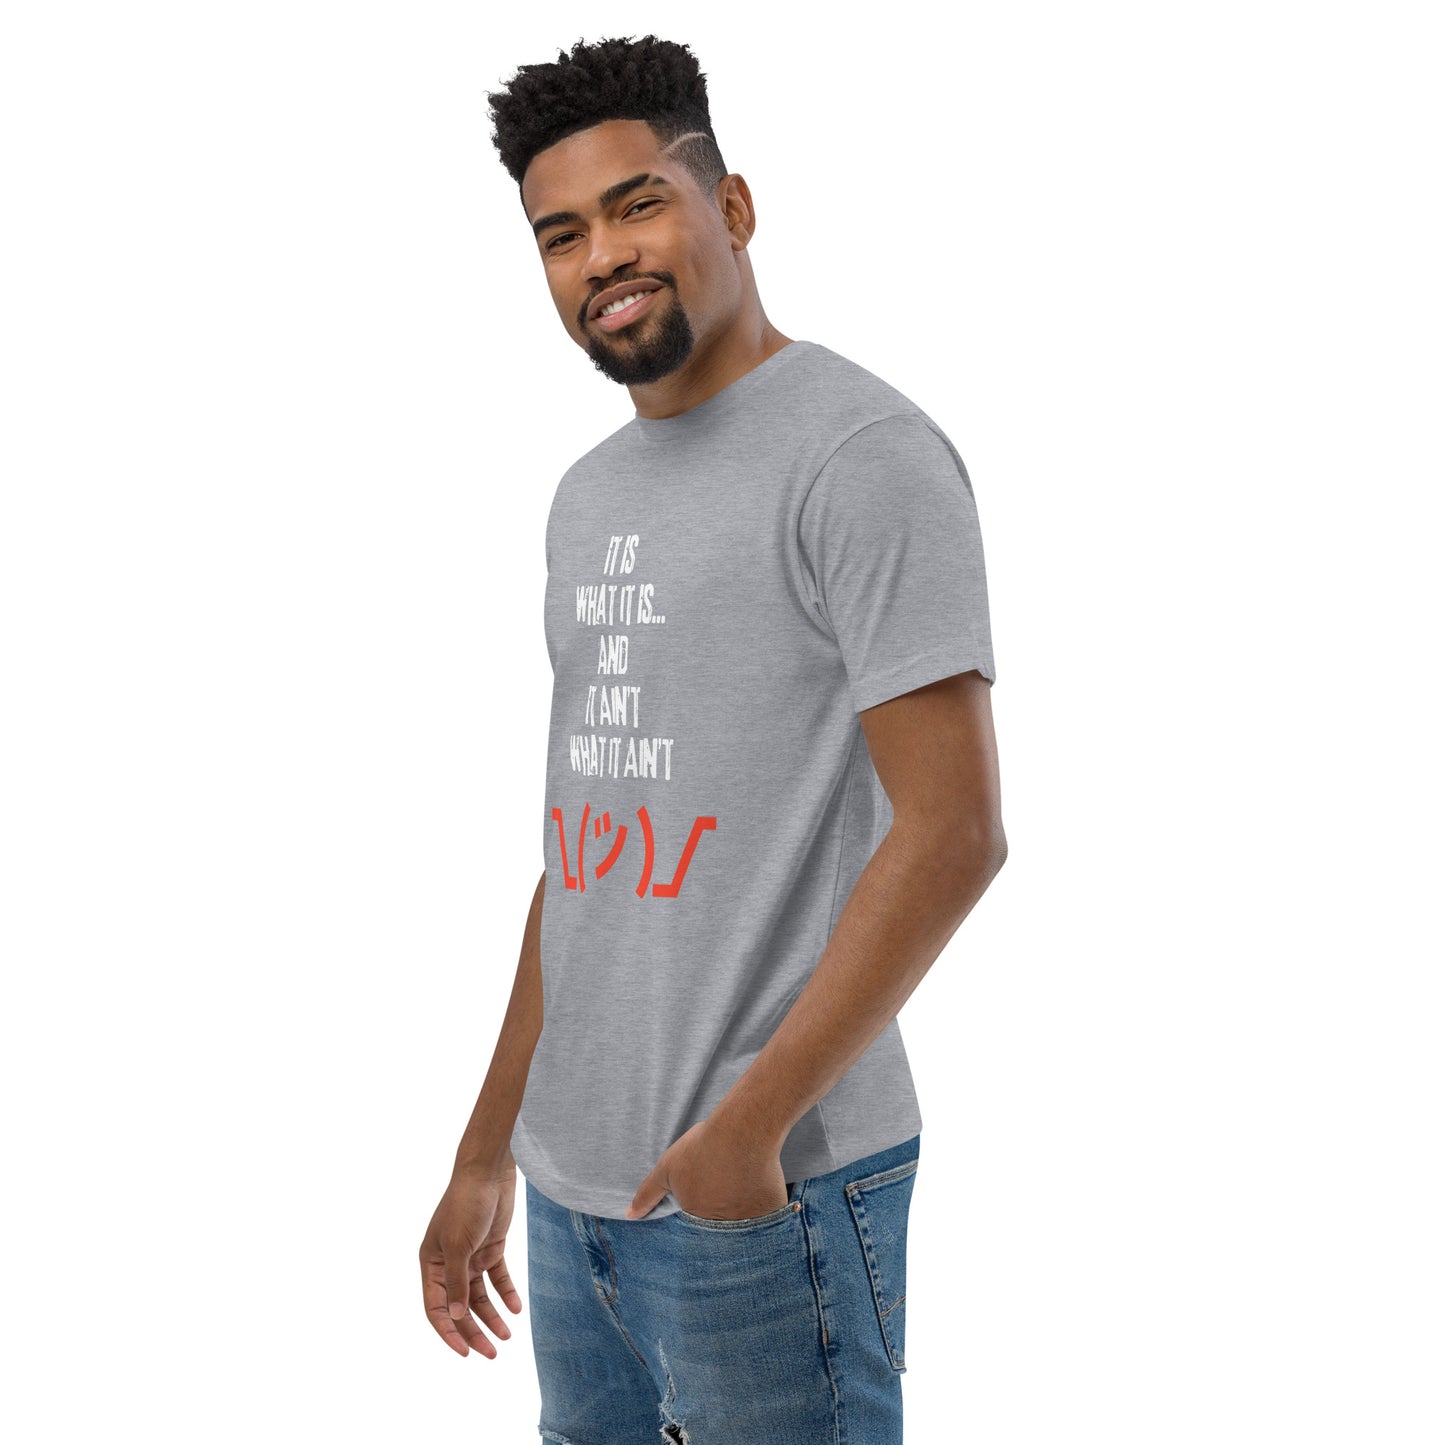 Lyrics Series: Smooth Grooving Fitted Short Sleeve T-shirt (Black, Blue & Heather Gray)